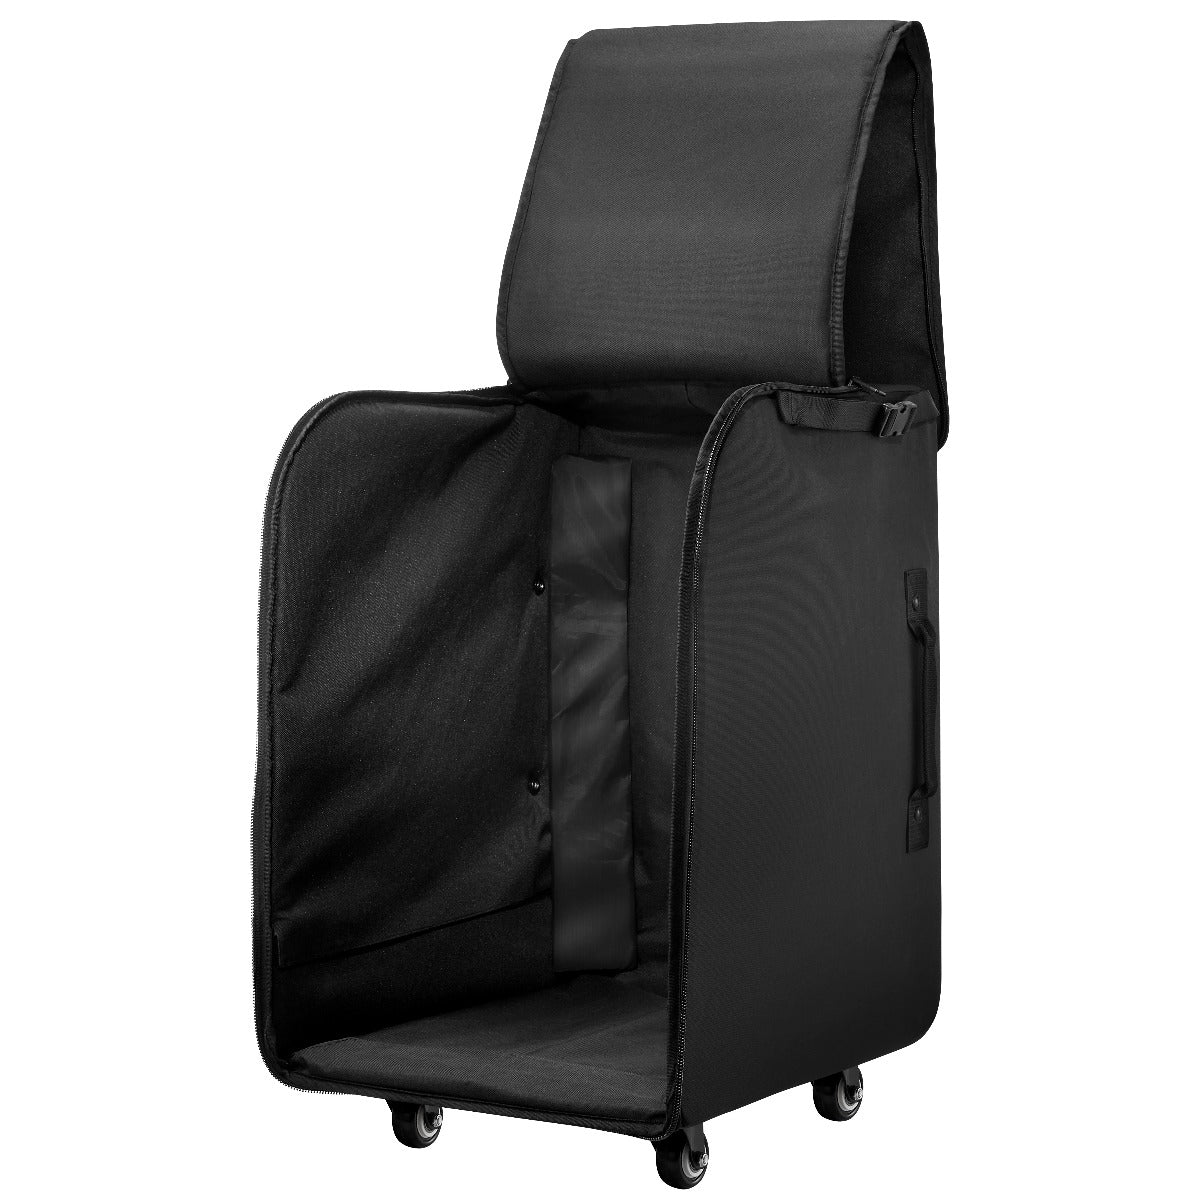 Electro-Voice EVOLVE 50 Rolling Case